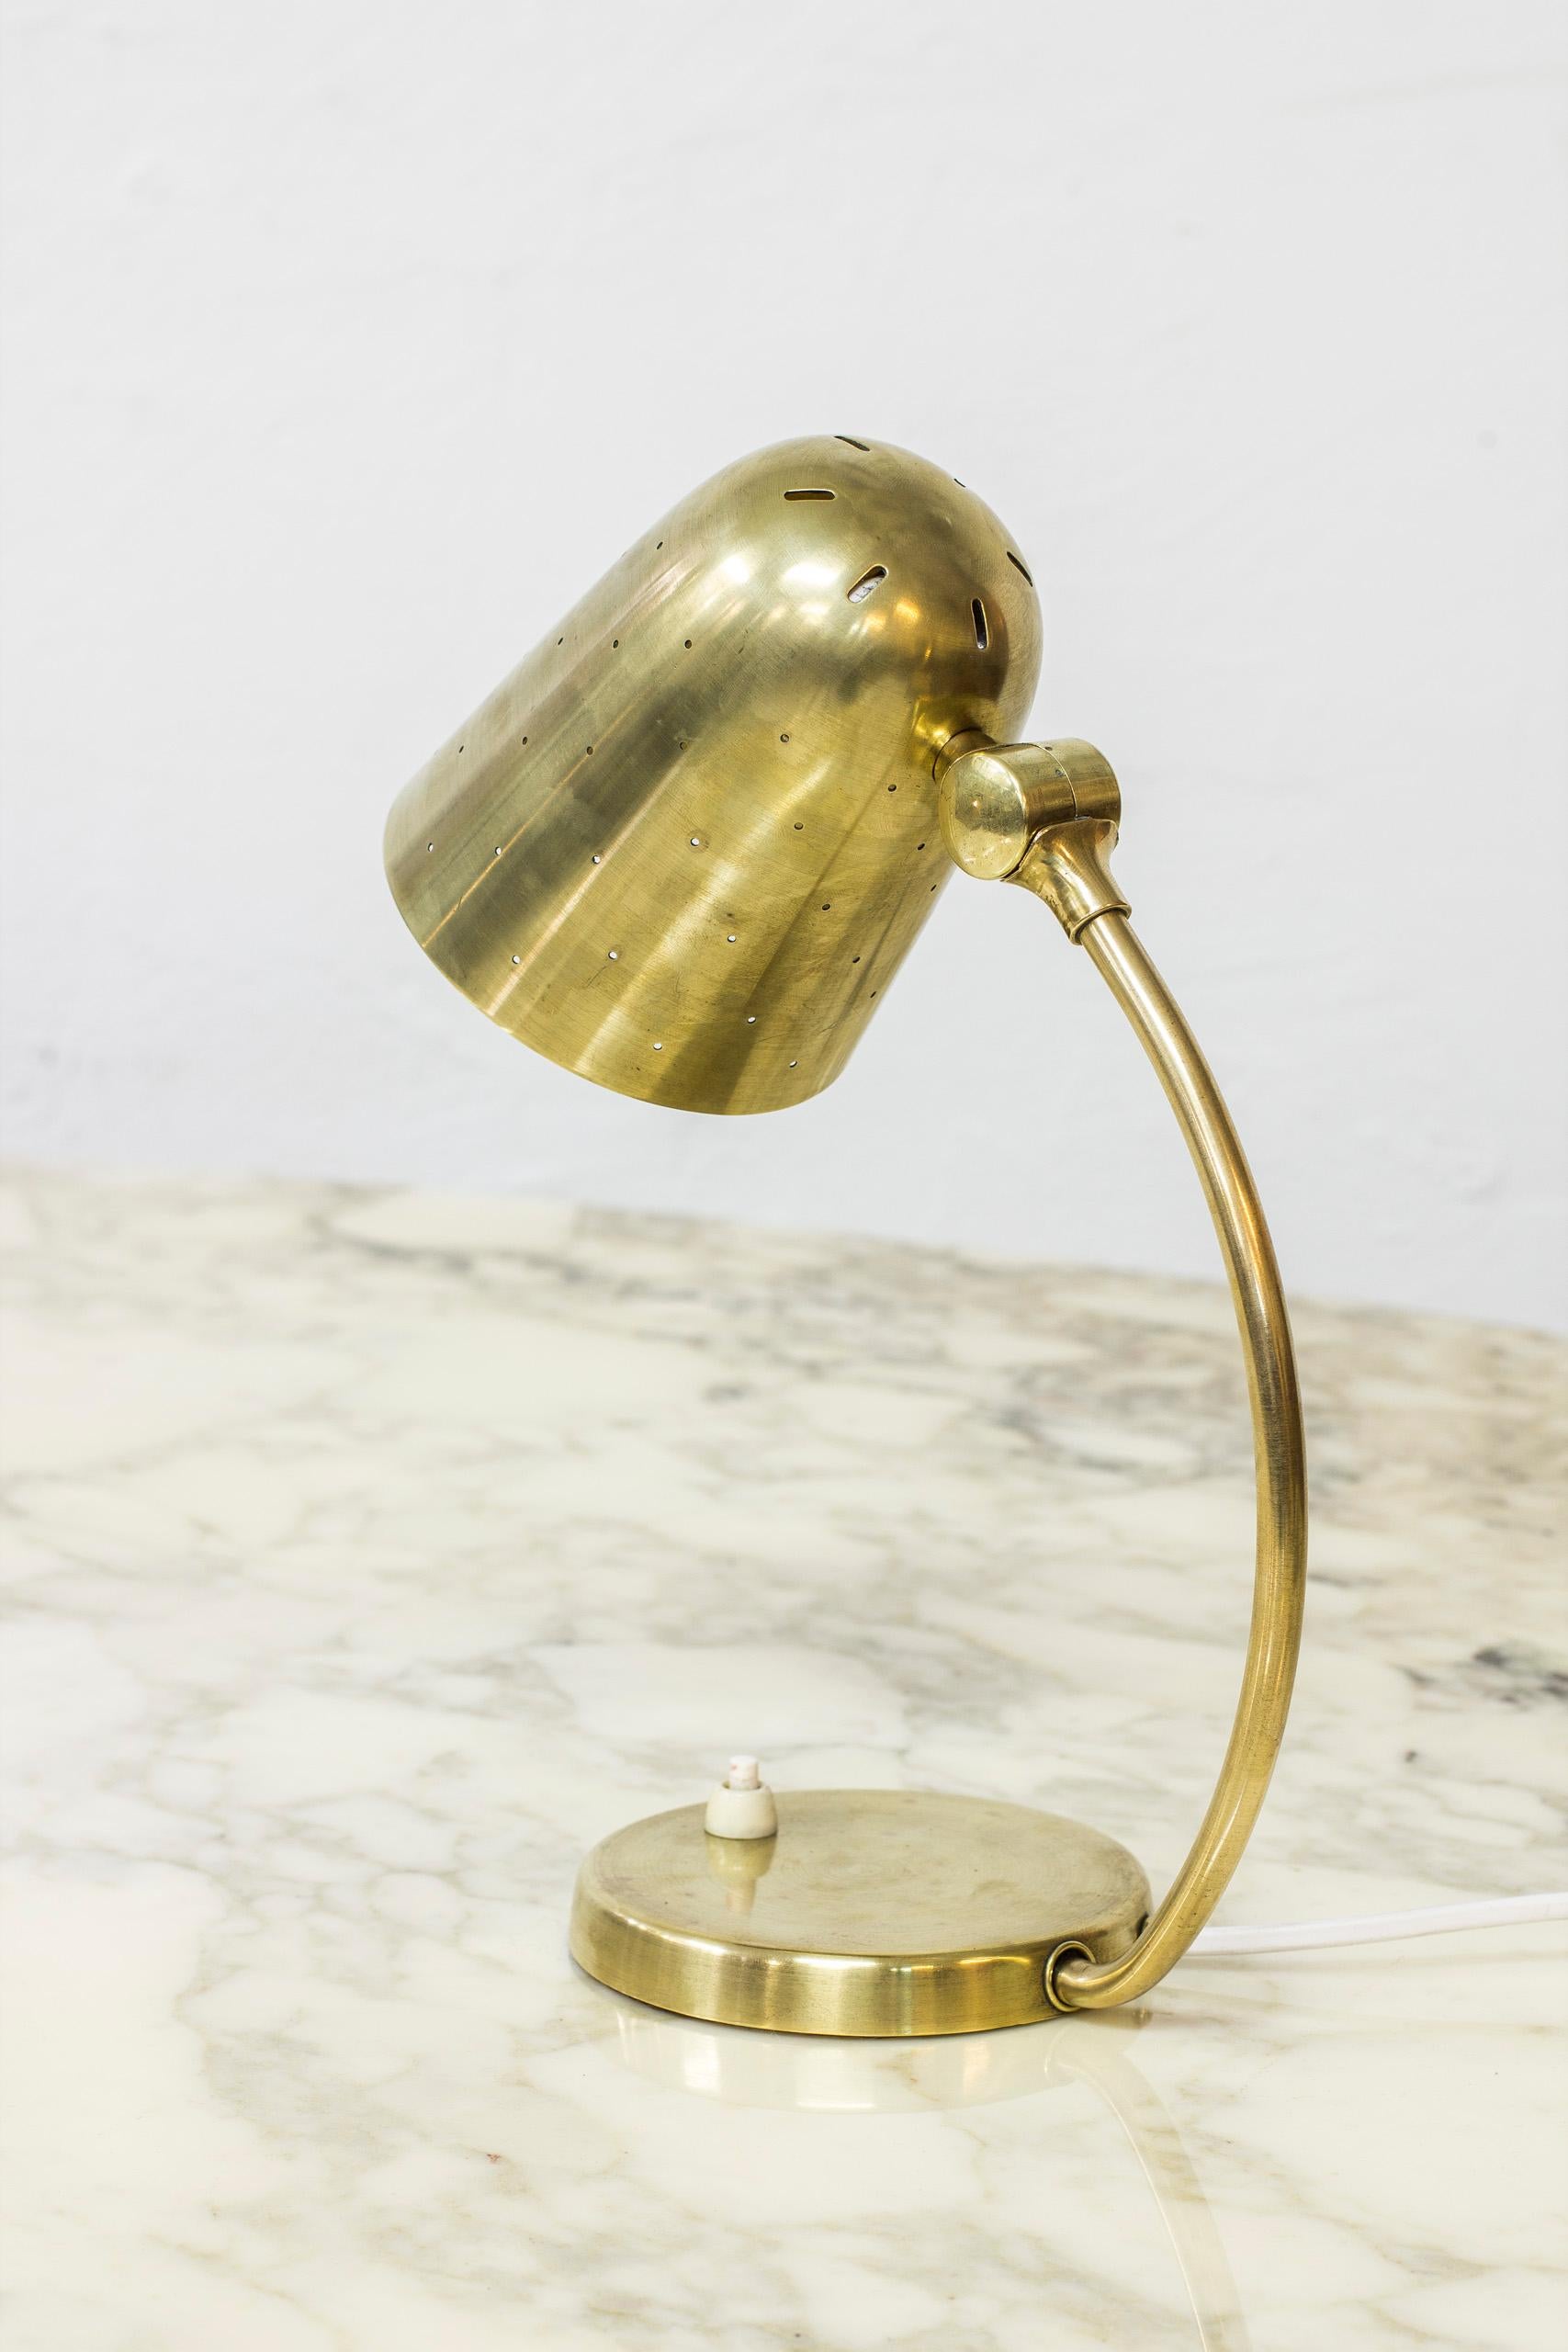 Swedish Modern Brass Table Lamp by Boréns, 1940s-1950s at 1stDibs